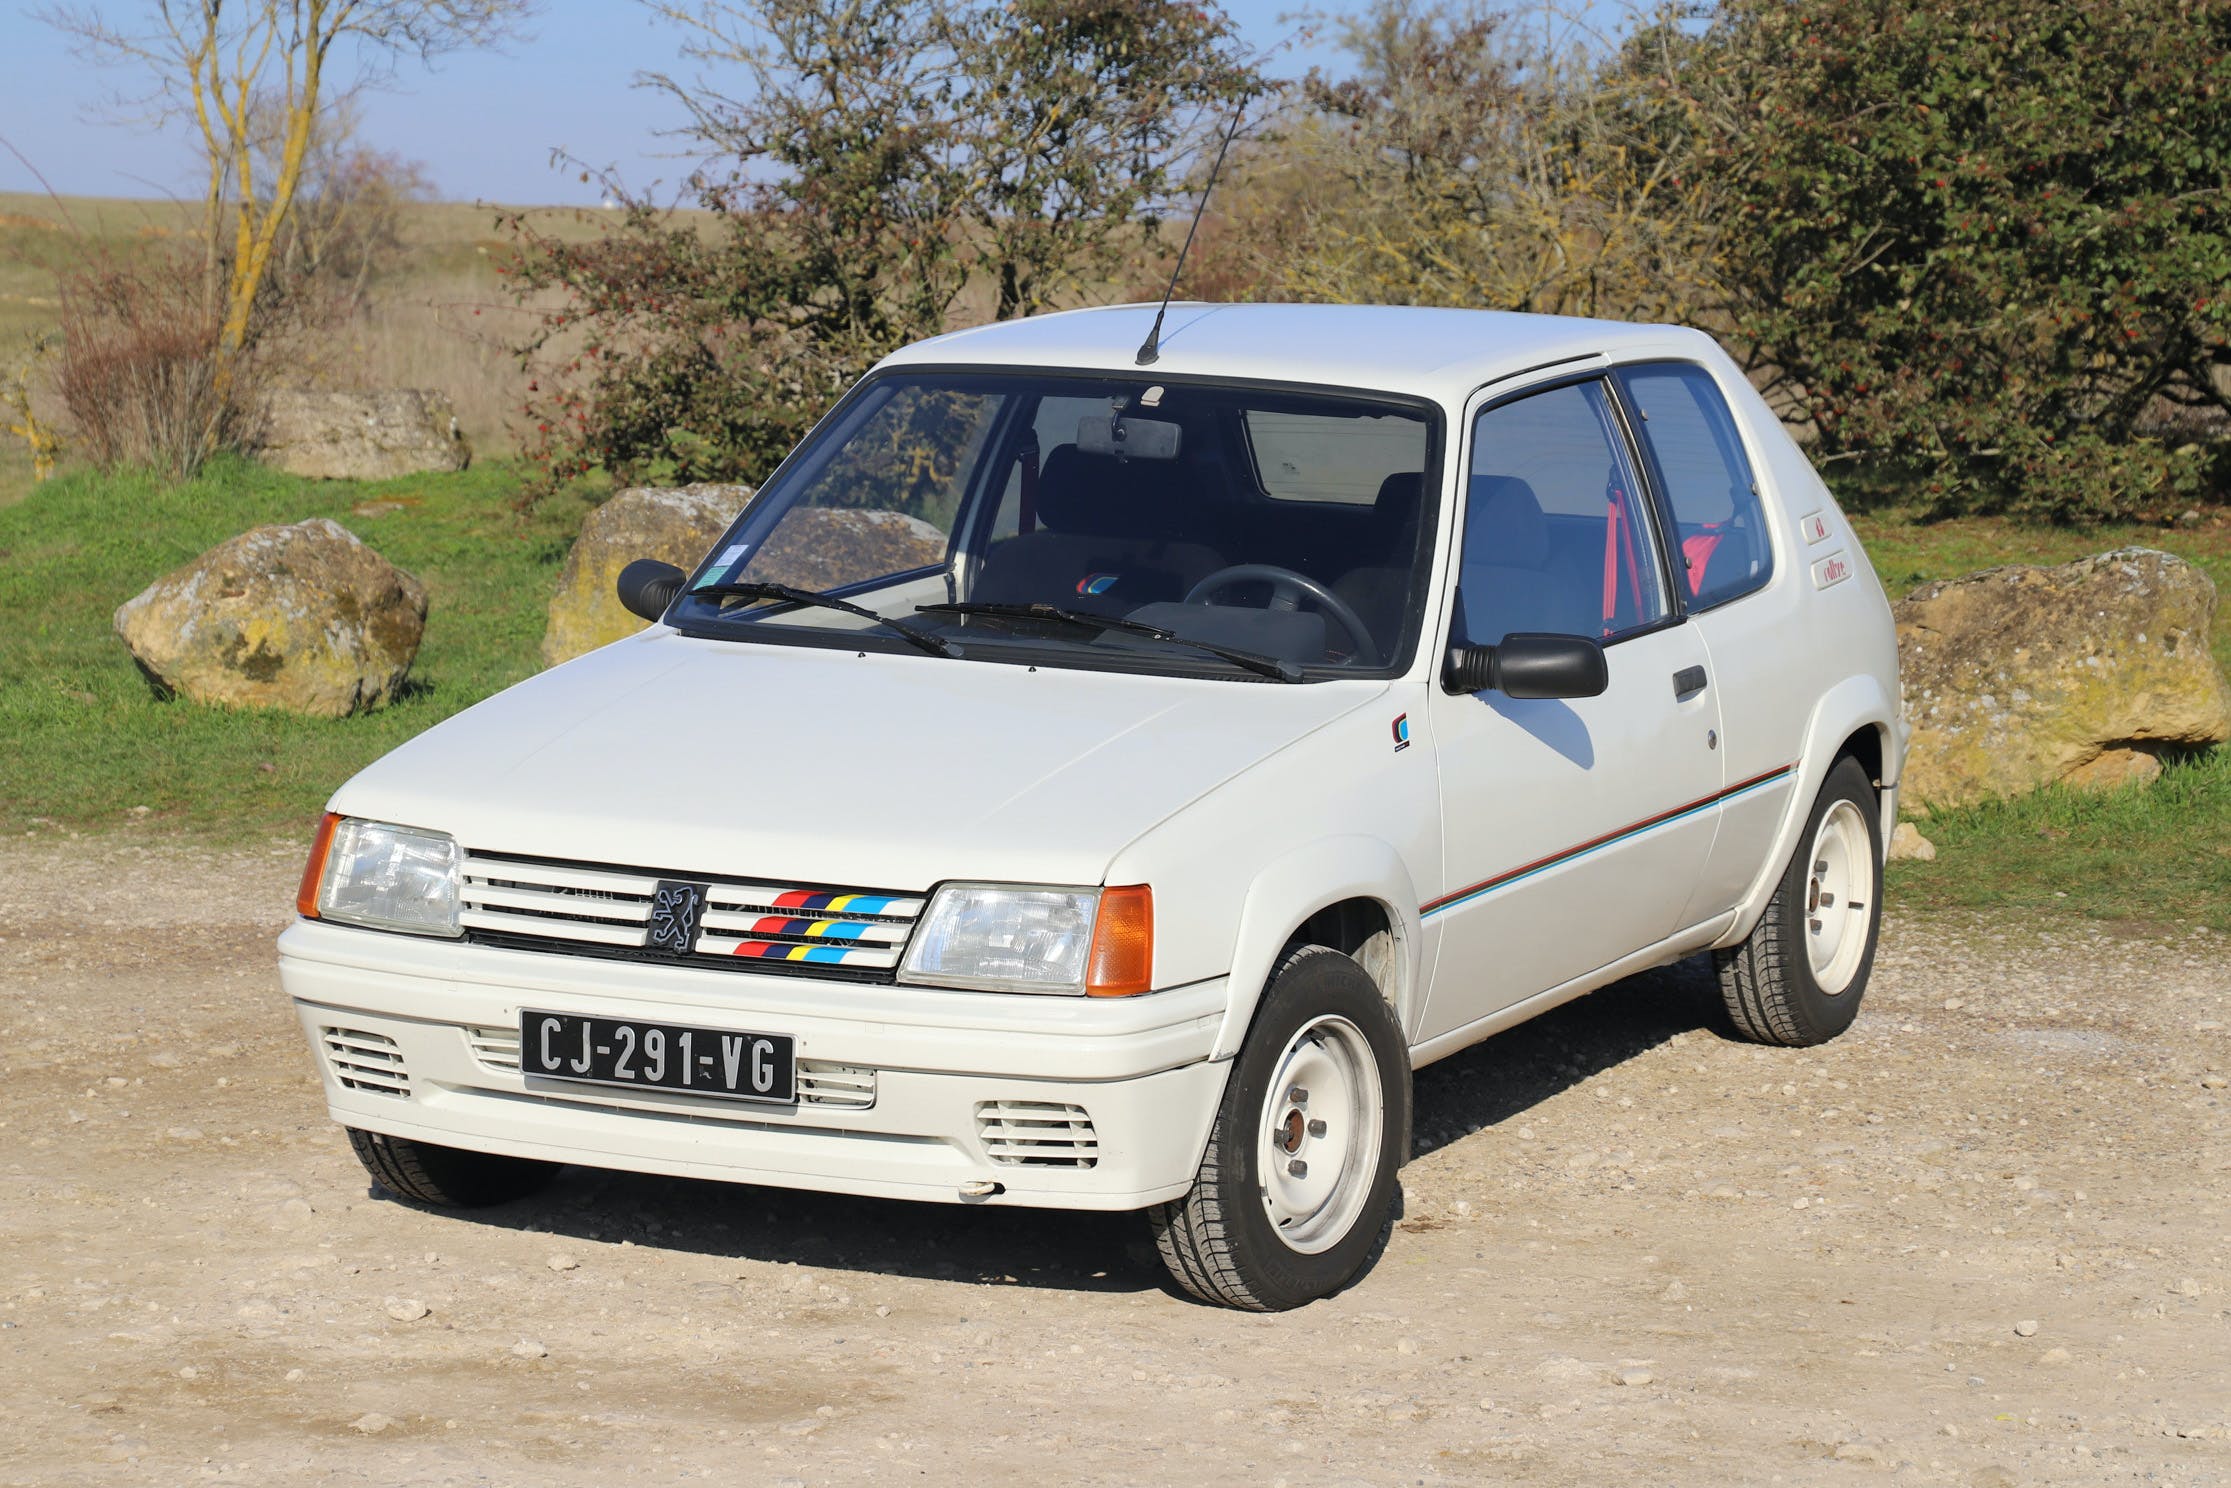 Take the long way home in this Peugeot 205 Rallye